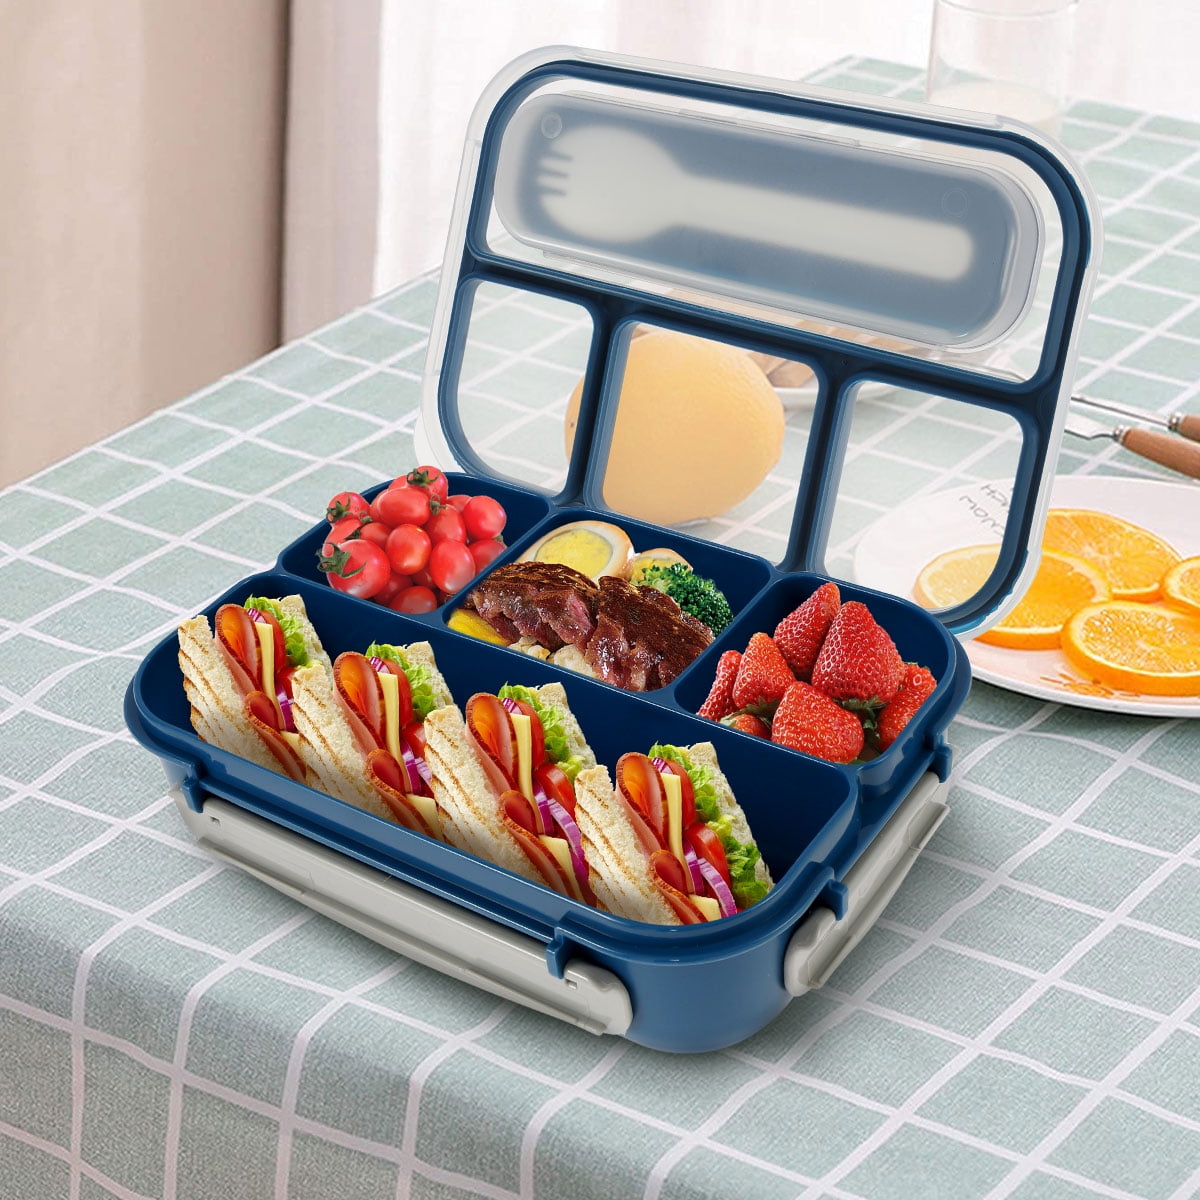 Buydeem CT1006 Bento Lunch Box, 3.4 Cups Food Container for Kids and Adults, BPA Free